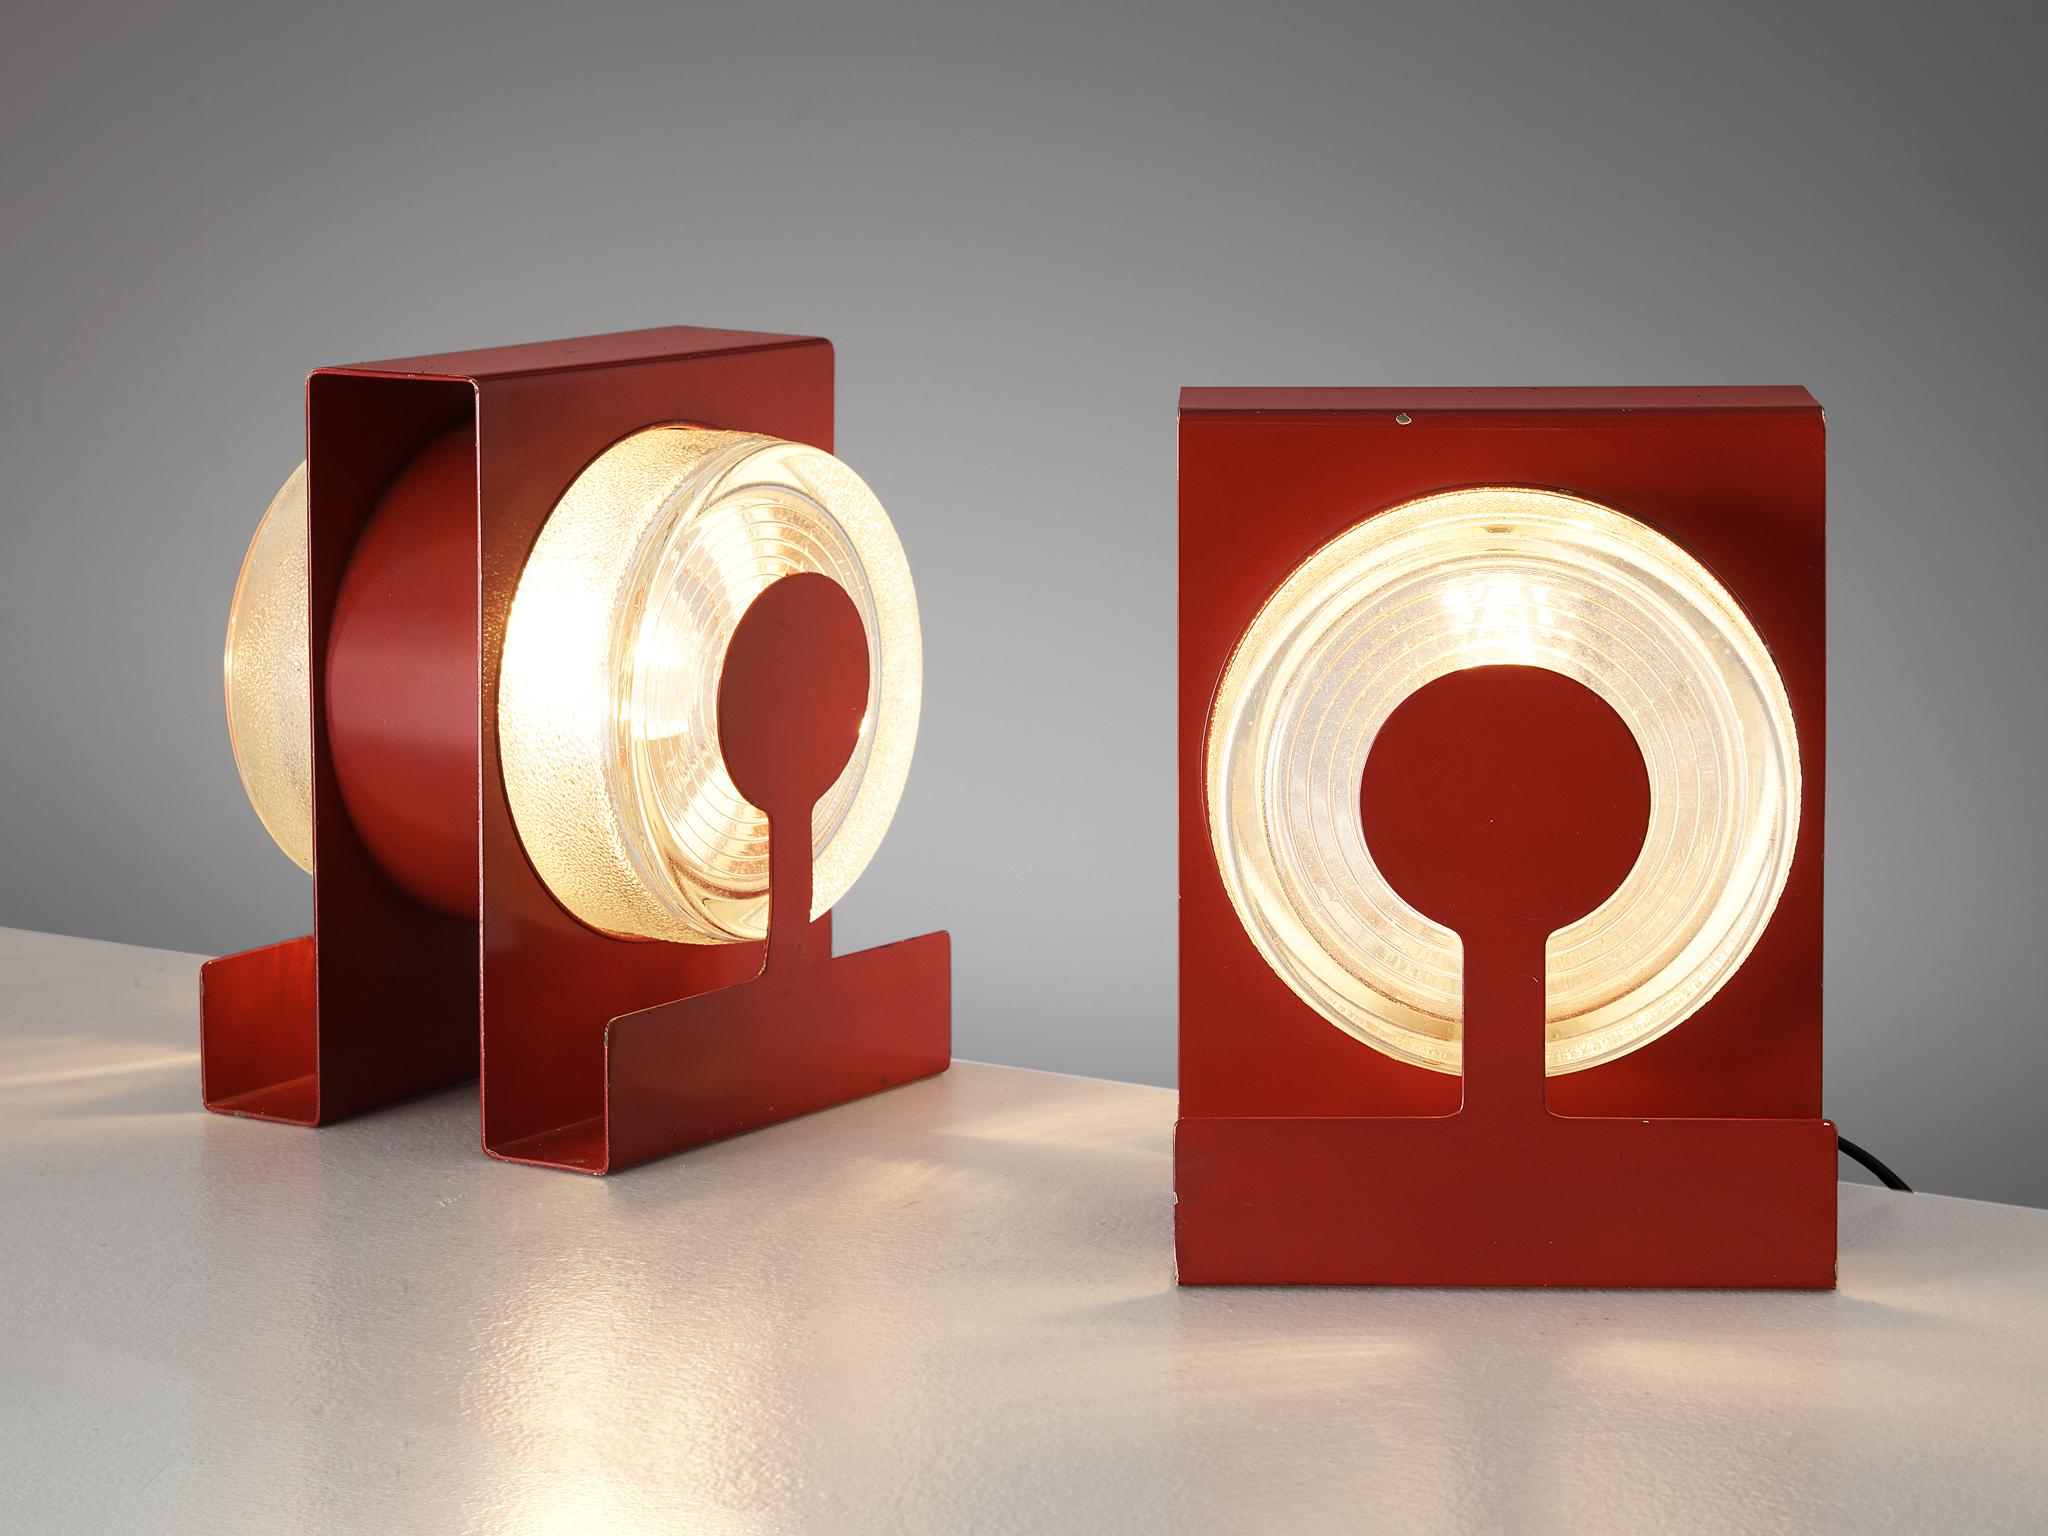 Eugenio Gentili Tedeschi, Fontana Arte, pair of table lamps, model 'Yoyo', red lacquered metal, pressed glass, Italy, 1971

A pair of wonderful table lamps by architect Eugenio Gentili Tedeschi for Fontana Arte. The clever design from 1971